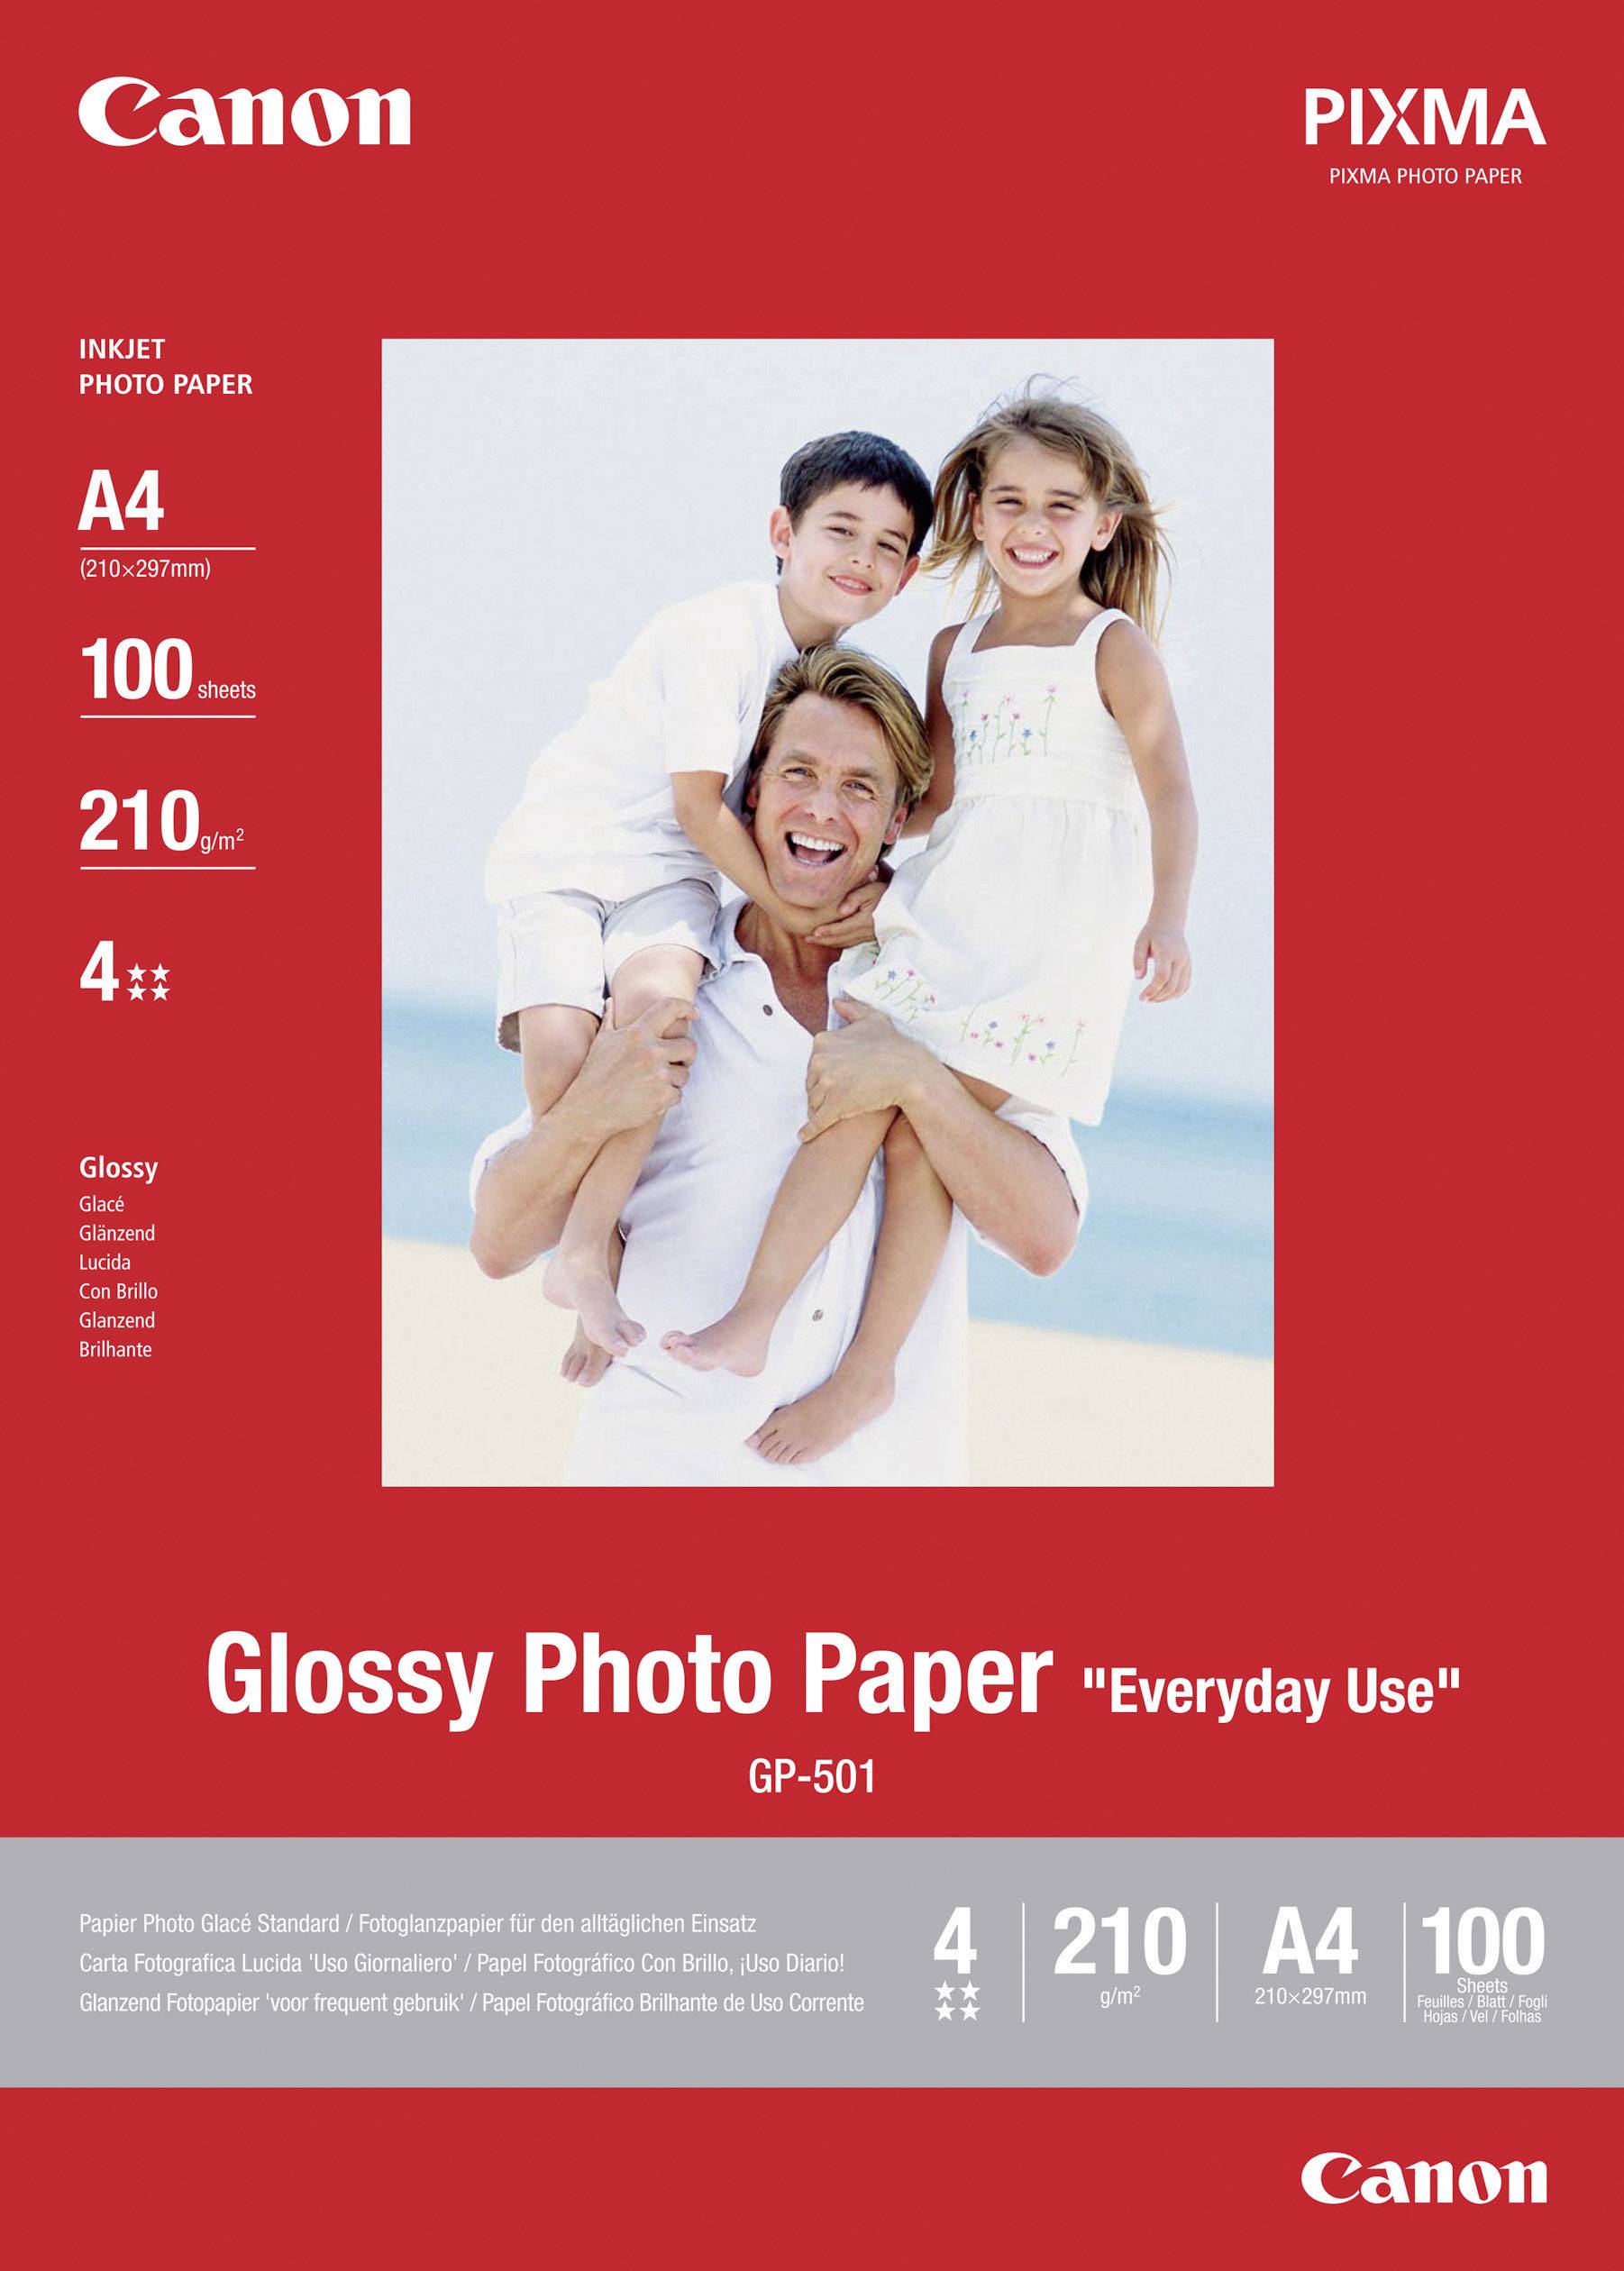 PP201 CANON PHOTO PAPER A4 